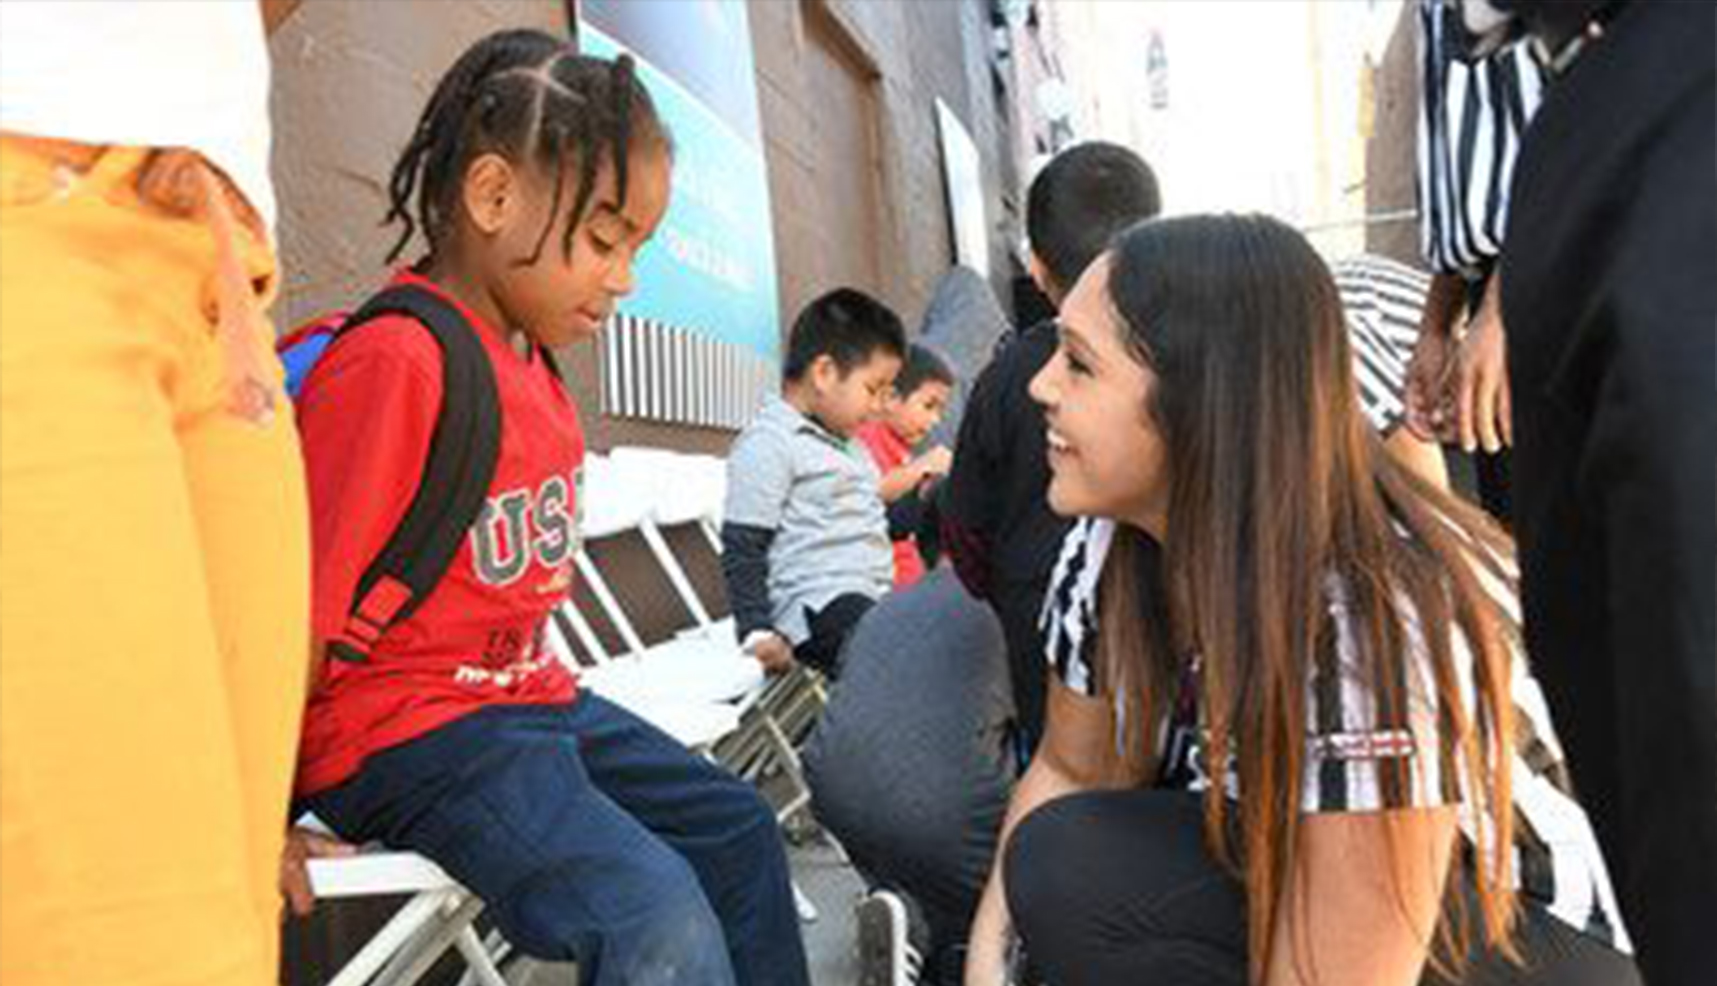 More Than 3,000 Underserved Children Attend Fred Jordan Missions’ “Care For Kids” Back-To-School Event On Skid Row